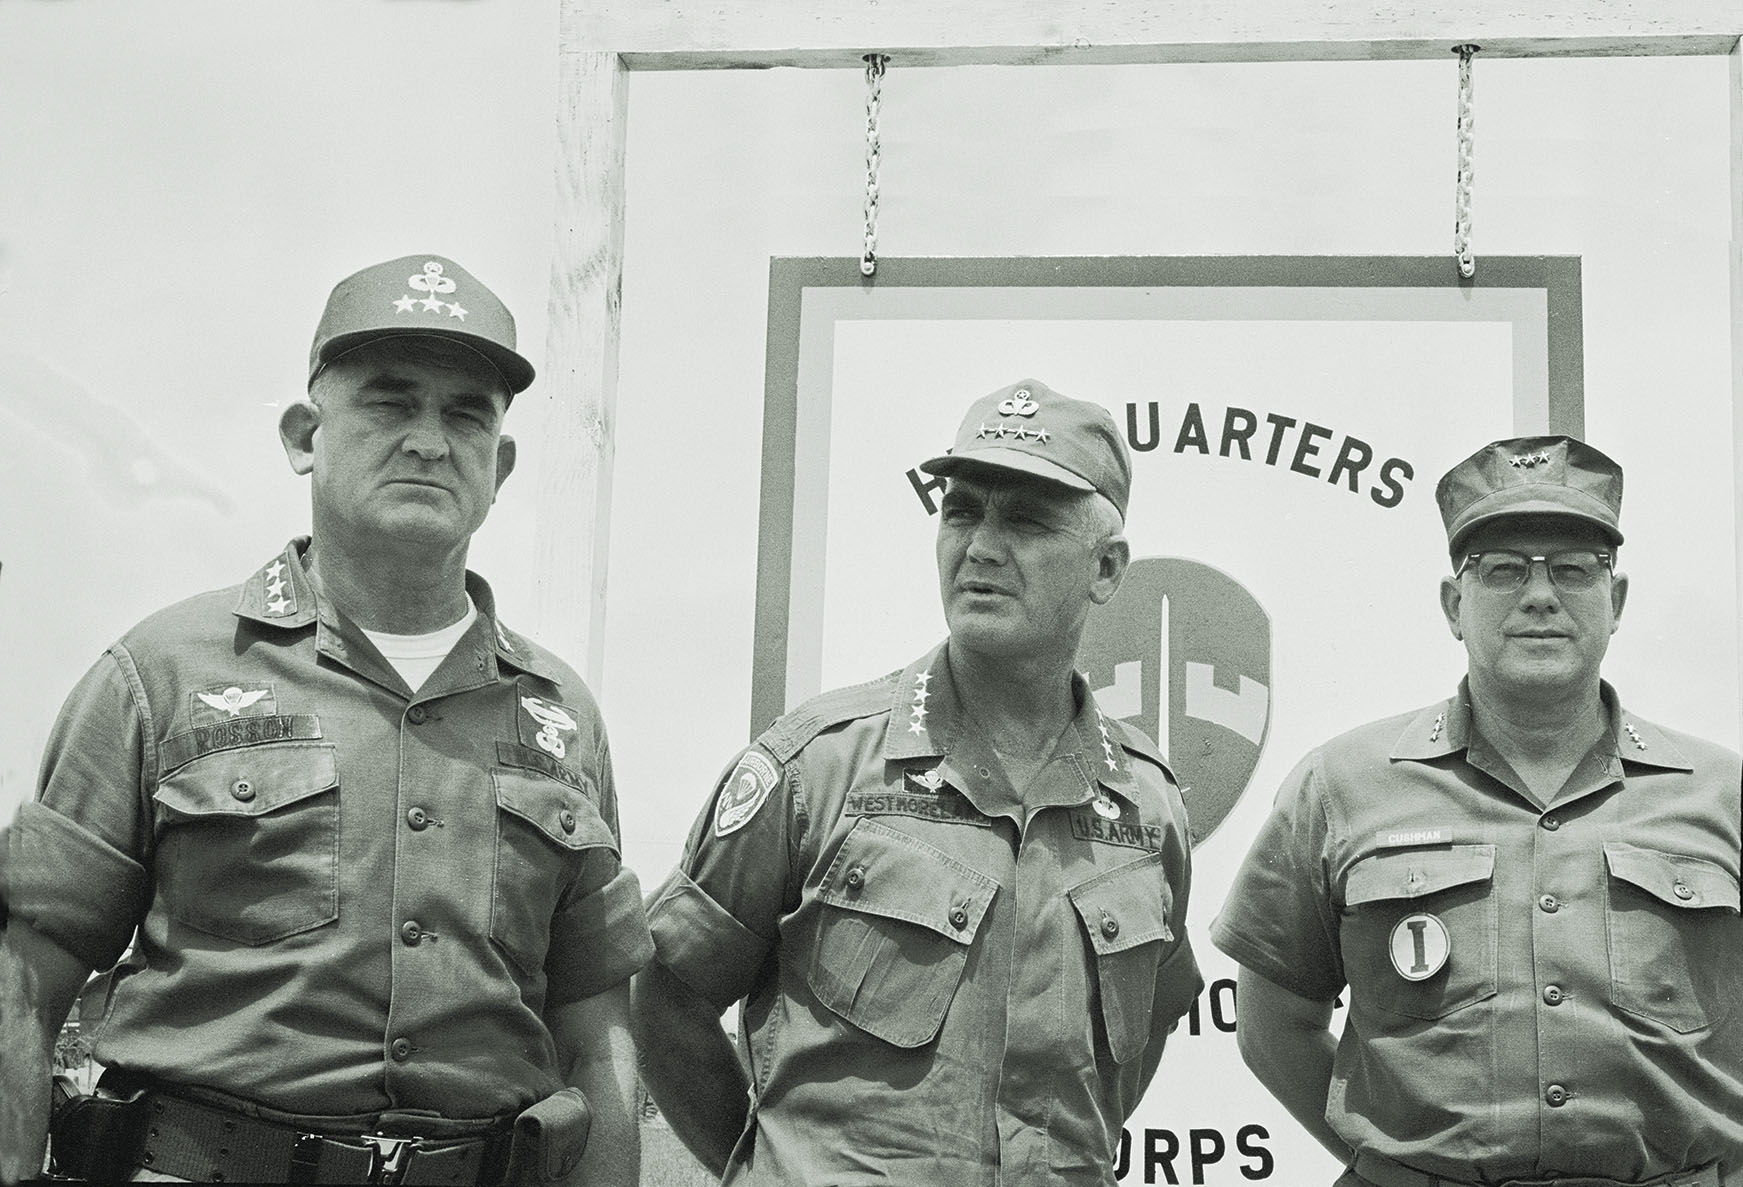 Top U.S. commander in Vietnam, Gen. William Westmoreland, center, was unhappy with the performance of Marine Lt. Gen. Robert Cushman, right, in northern South Vietnam, and put some forces there under the direct control of Army Lt. Gen. William Rosson, left. / Getty Images